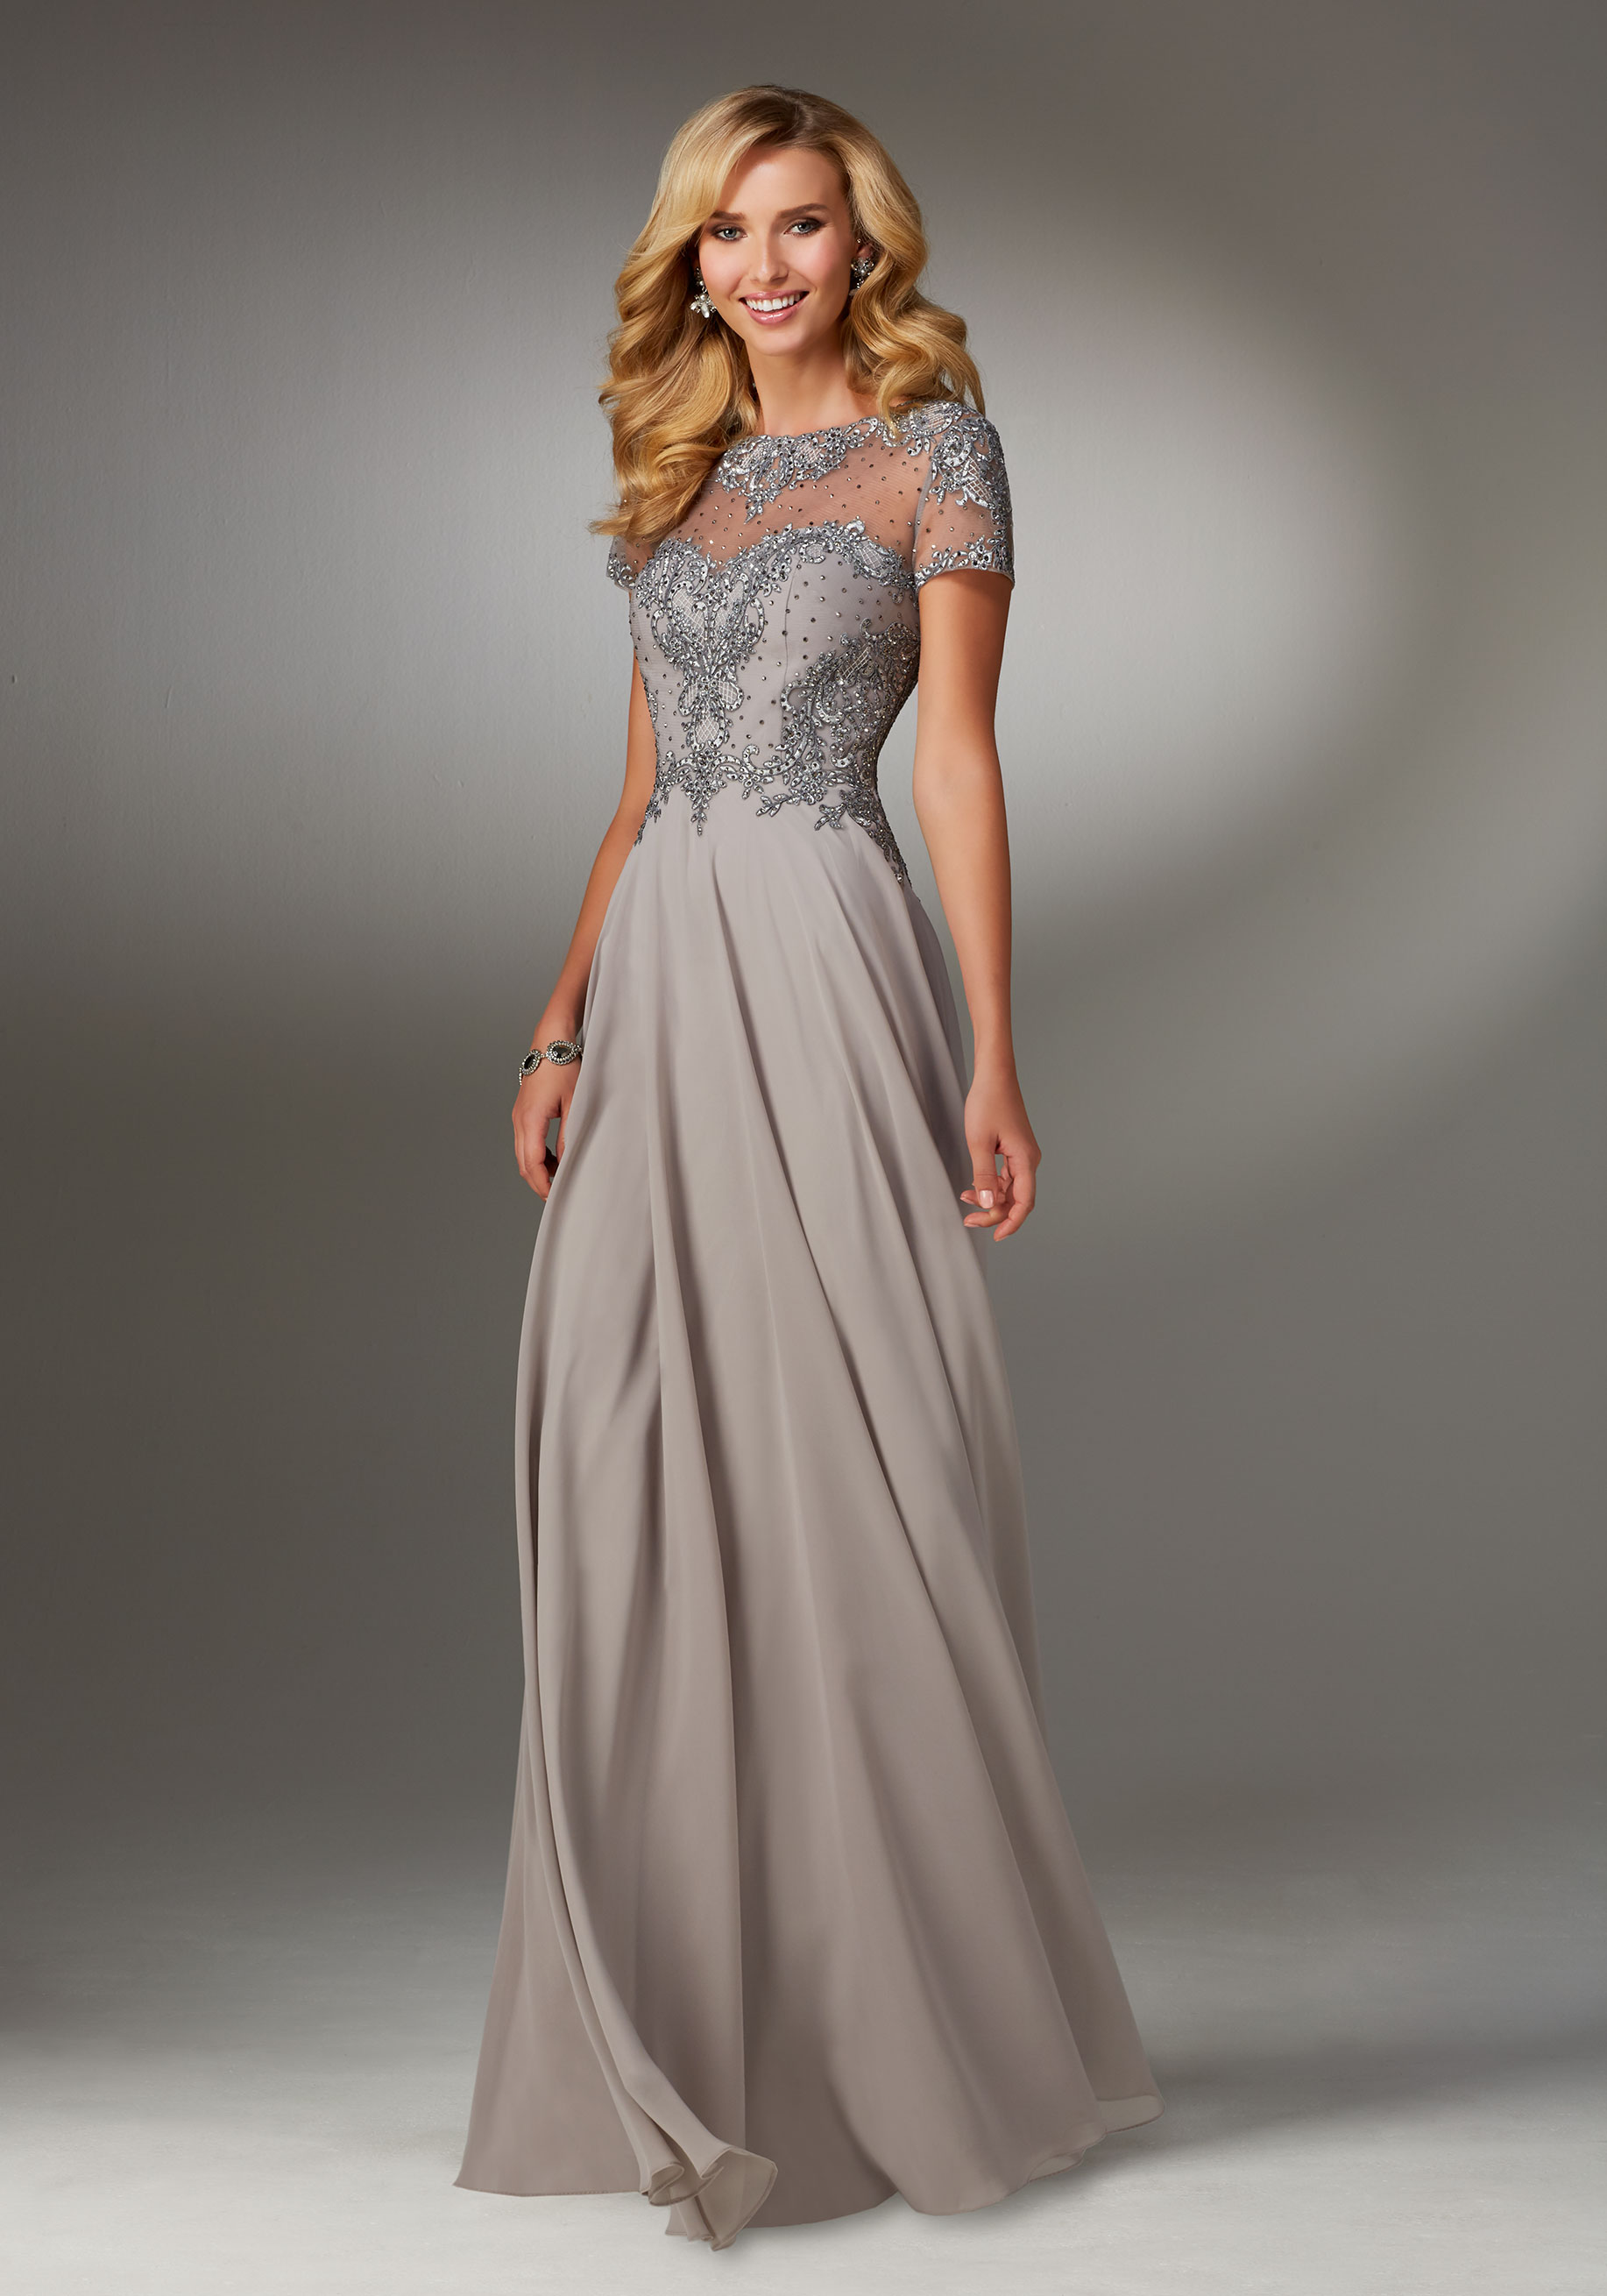 Special Occasion Dresses chiffon special occasion dress with beaded embroidery on bodice XUOEYQW